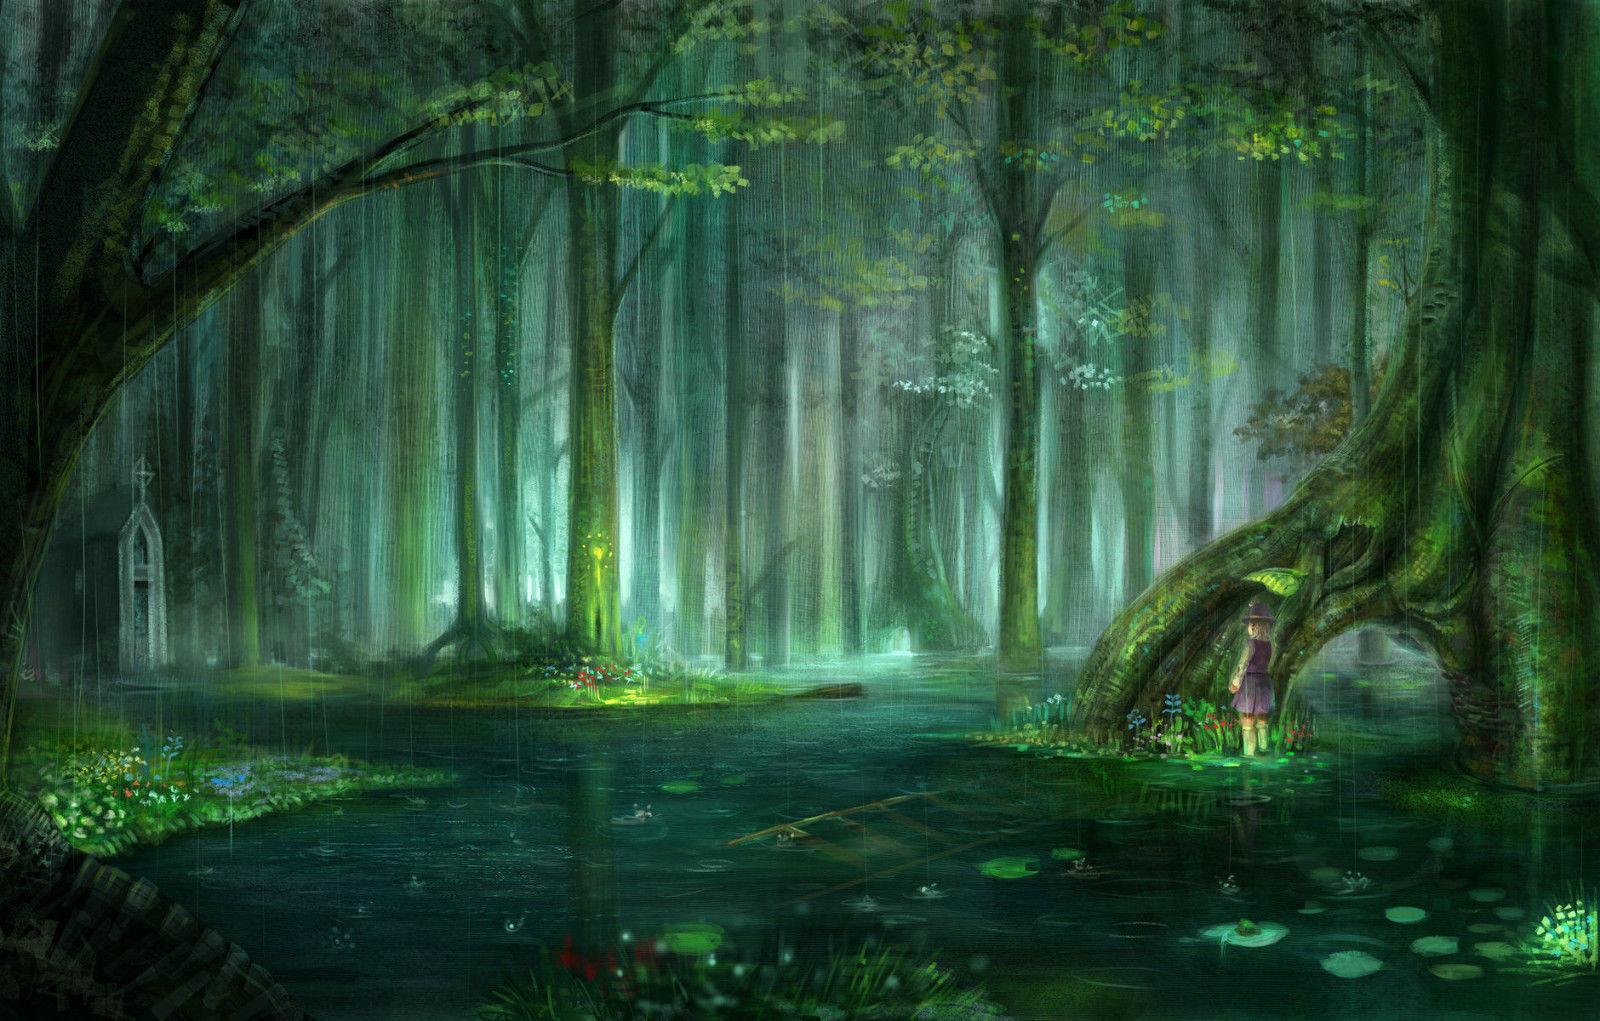  Forest  Paint  Wallpaper  KoLPaPer Awesome Free HD Wallpapers 